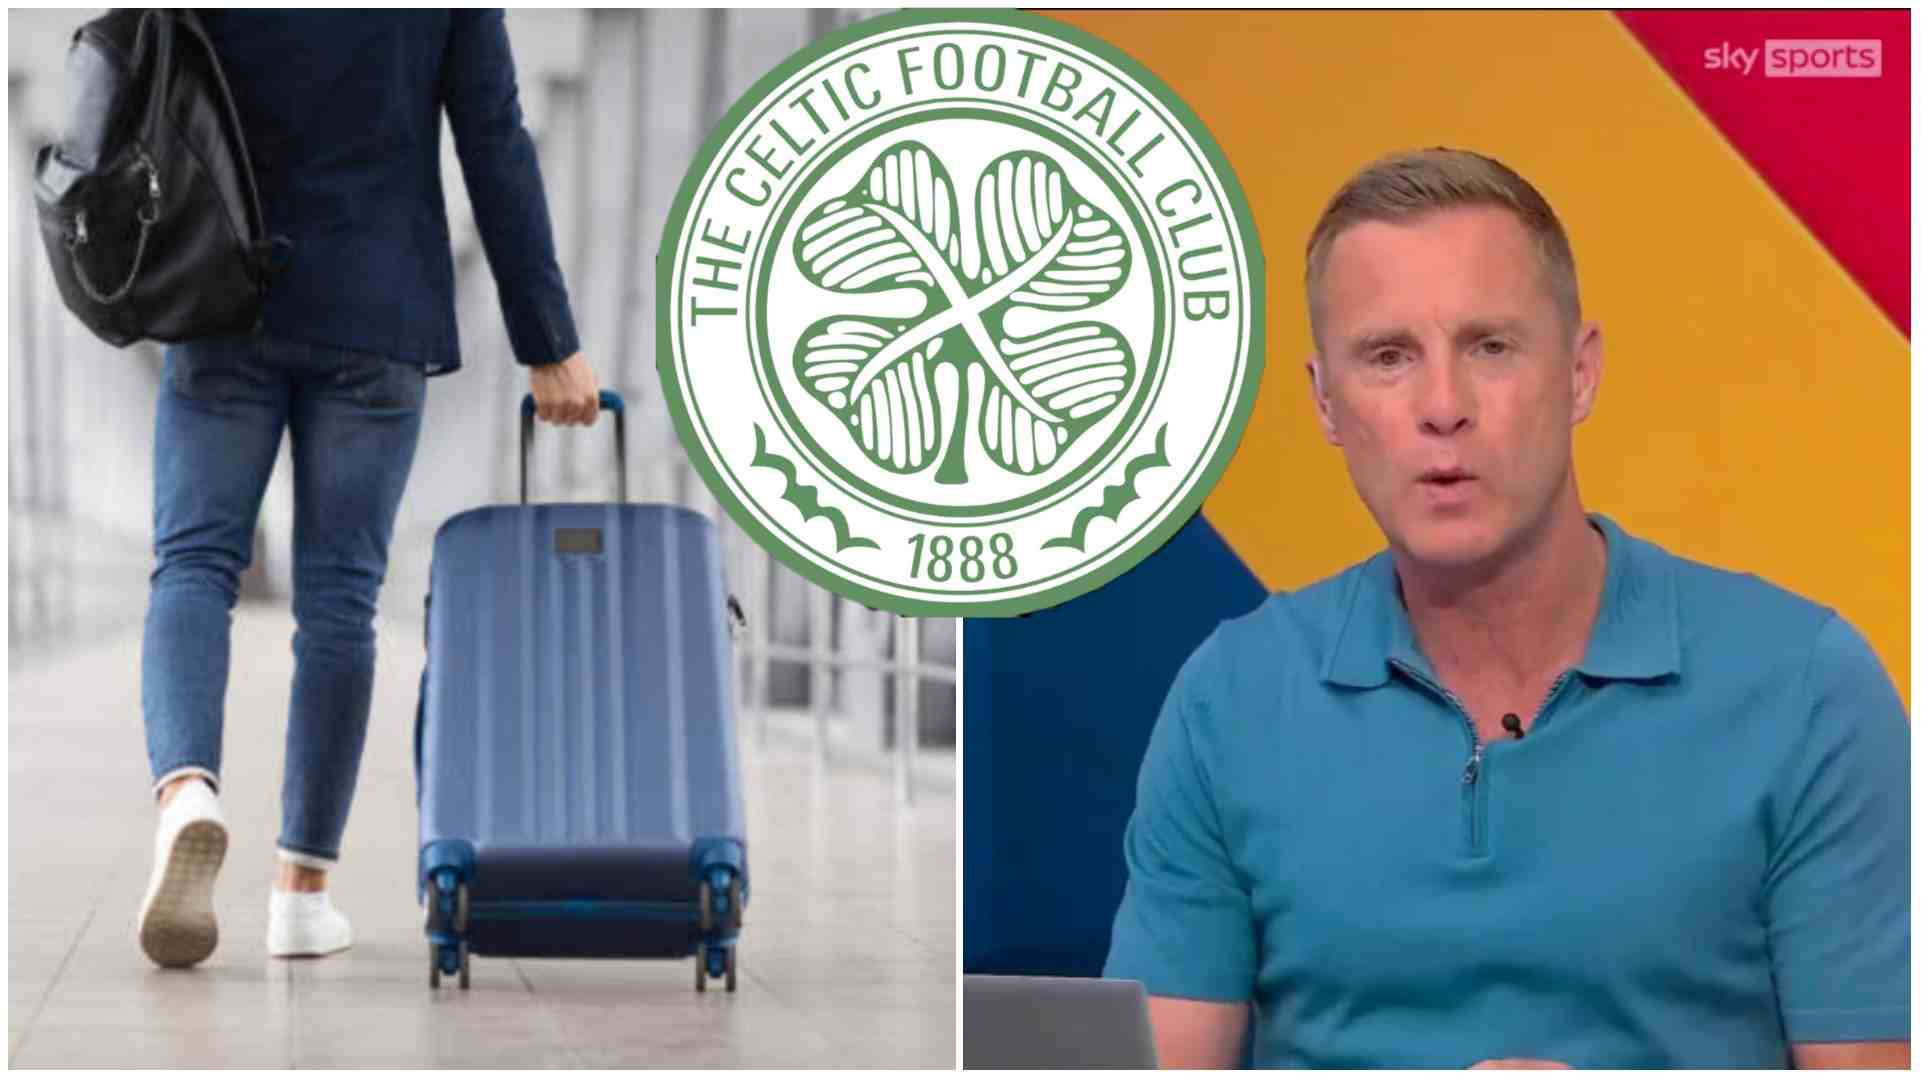 “Goodbye” – World-class Celtic midfield star LEAVES the club after spending 4-years in Glasgow as player has said Farewell to teammates amid OFFICIAL announcement by the Hoops